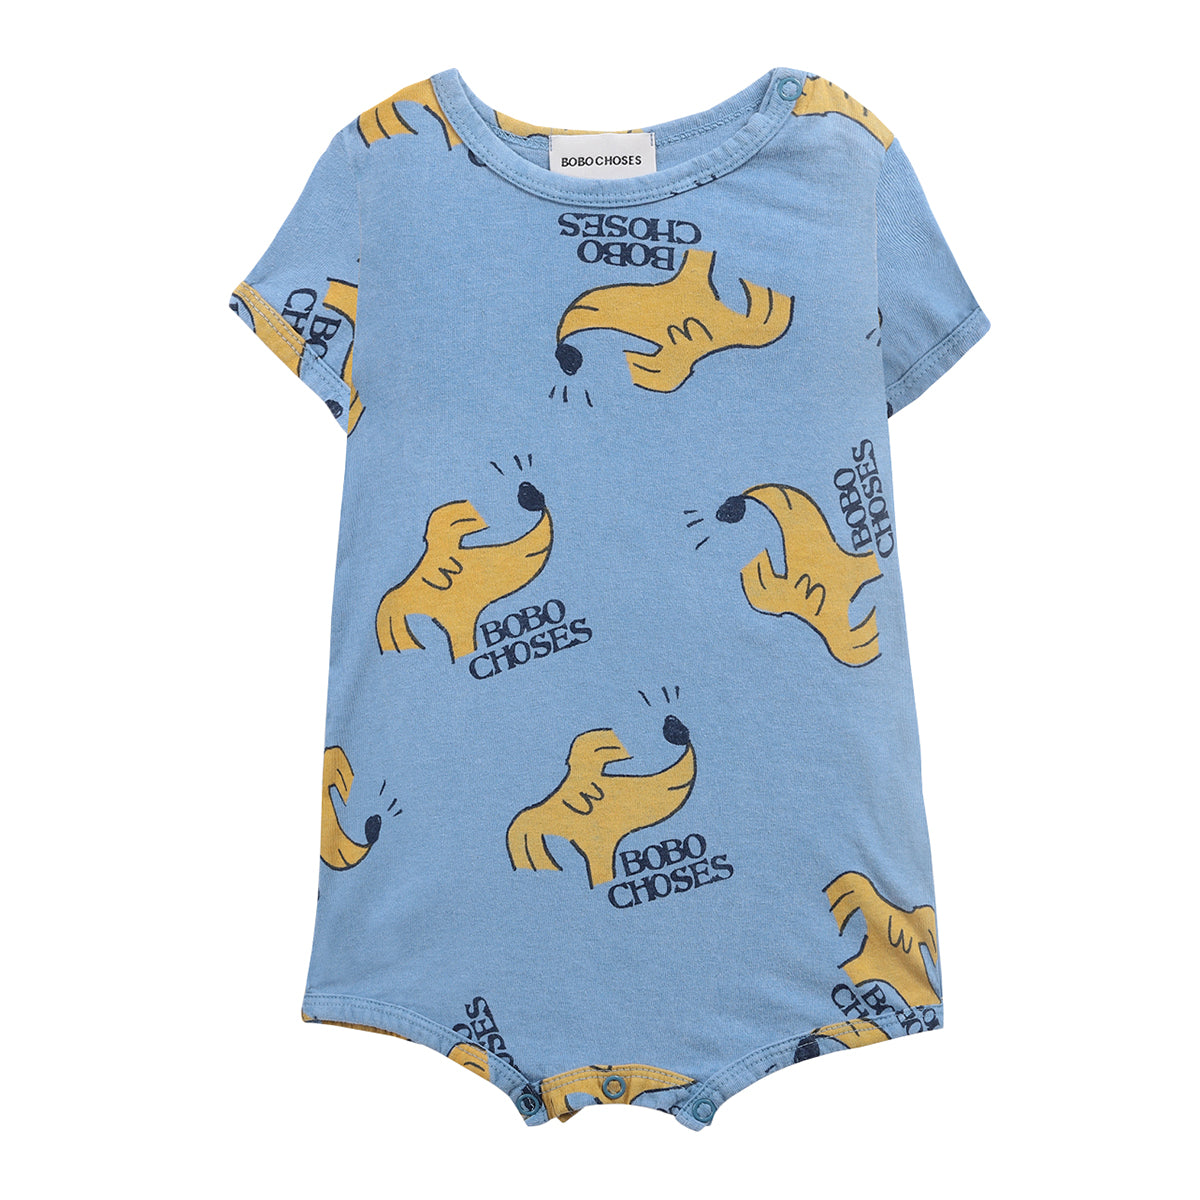 Bobo Choses Sniffy Dog All Over Playsuit